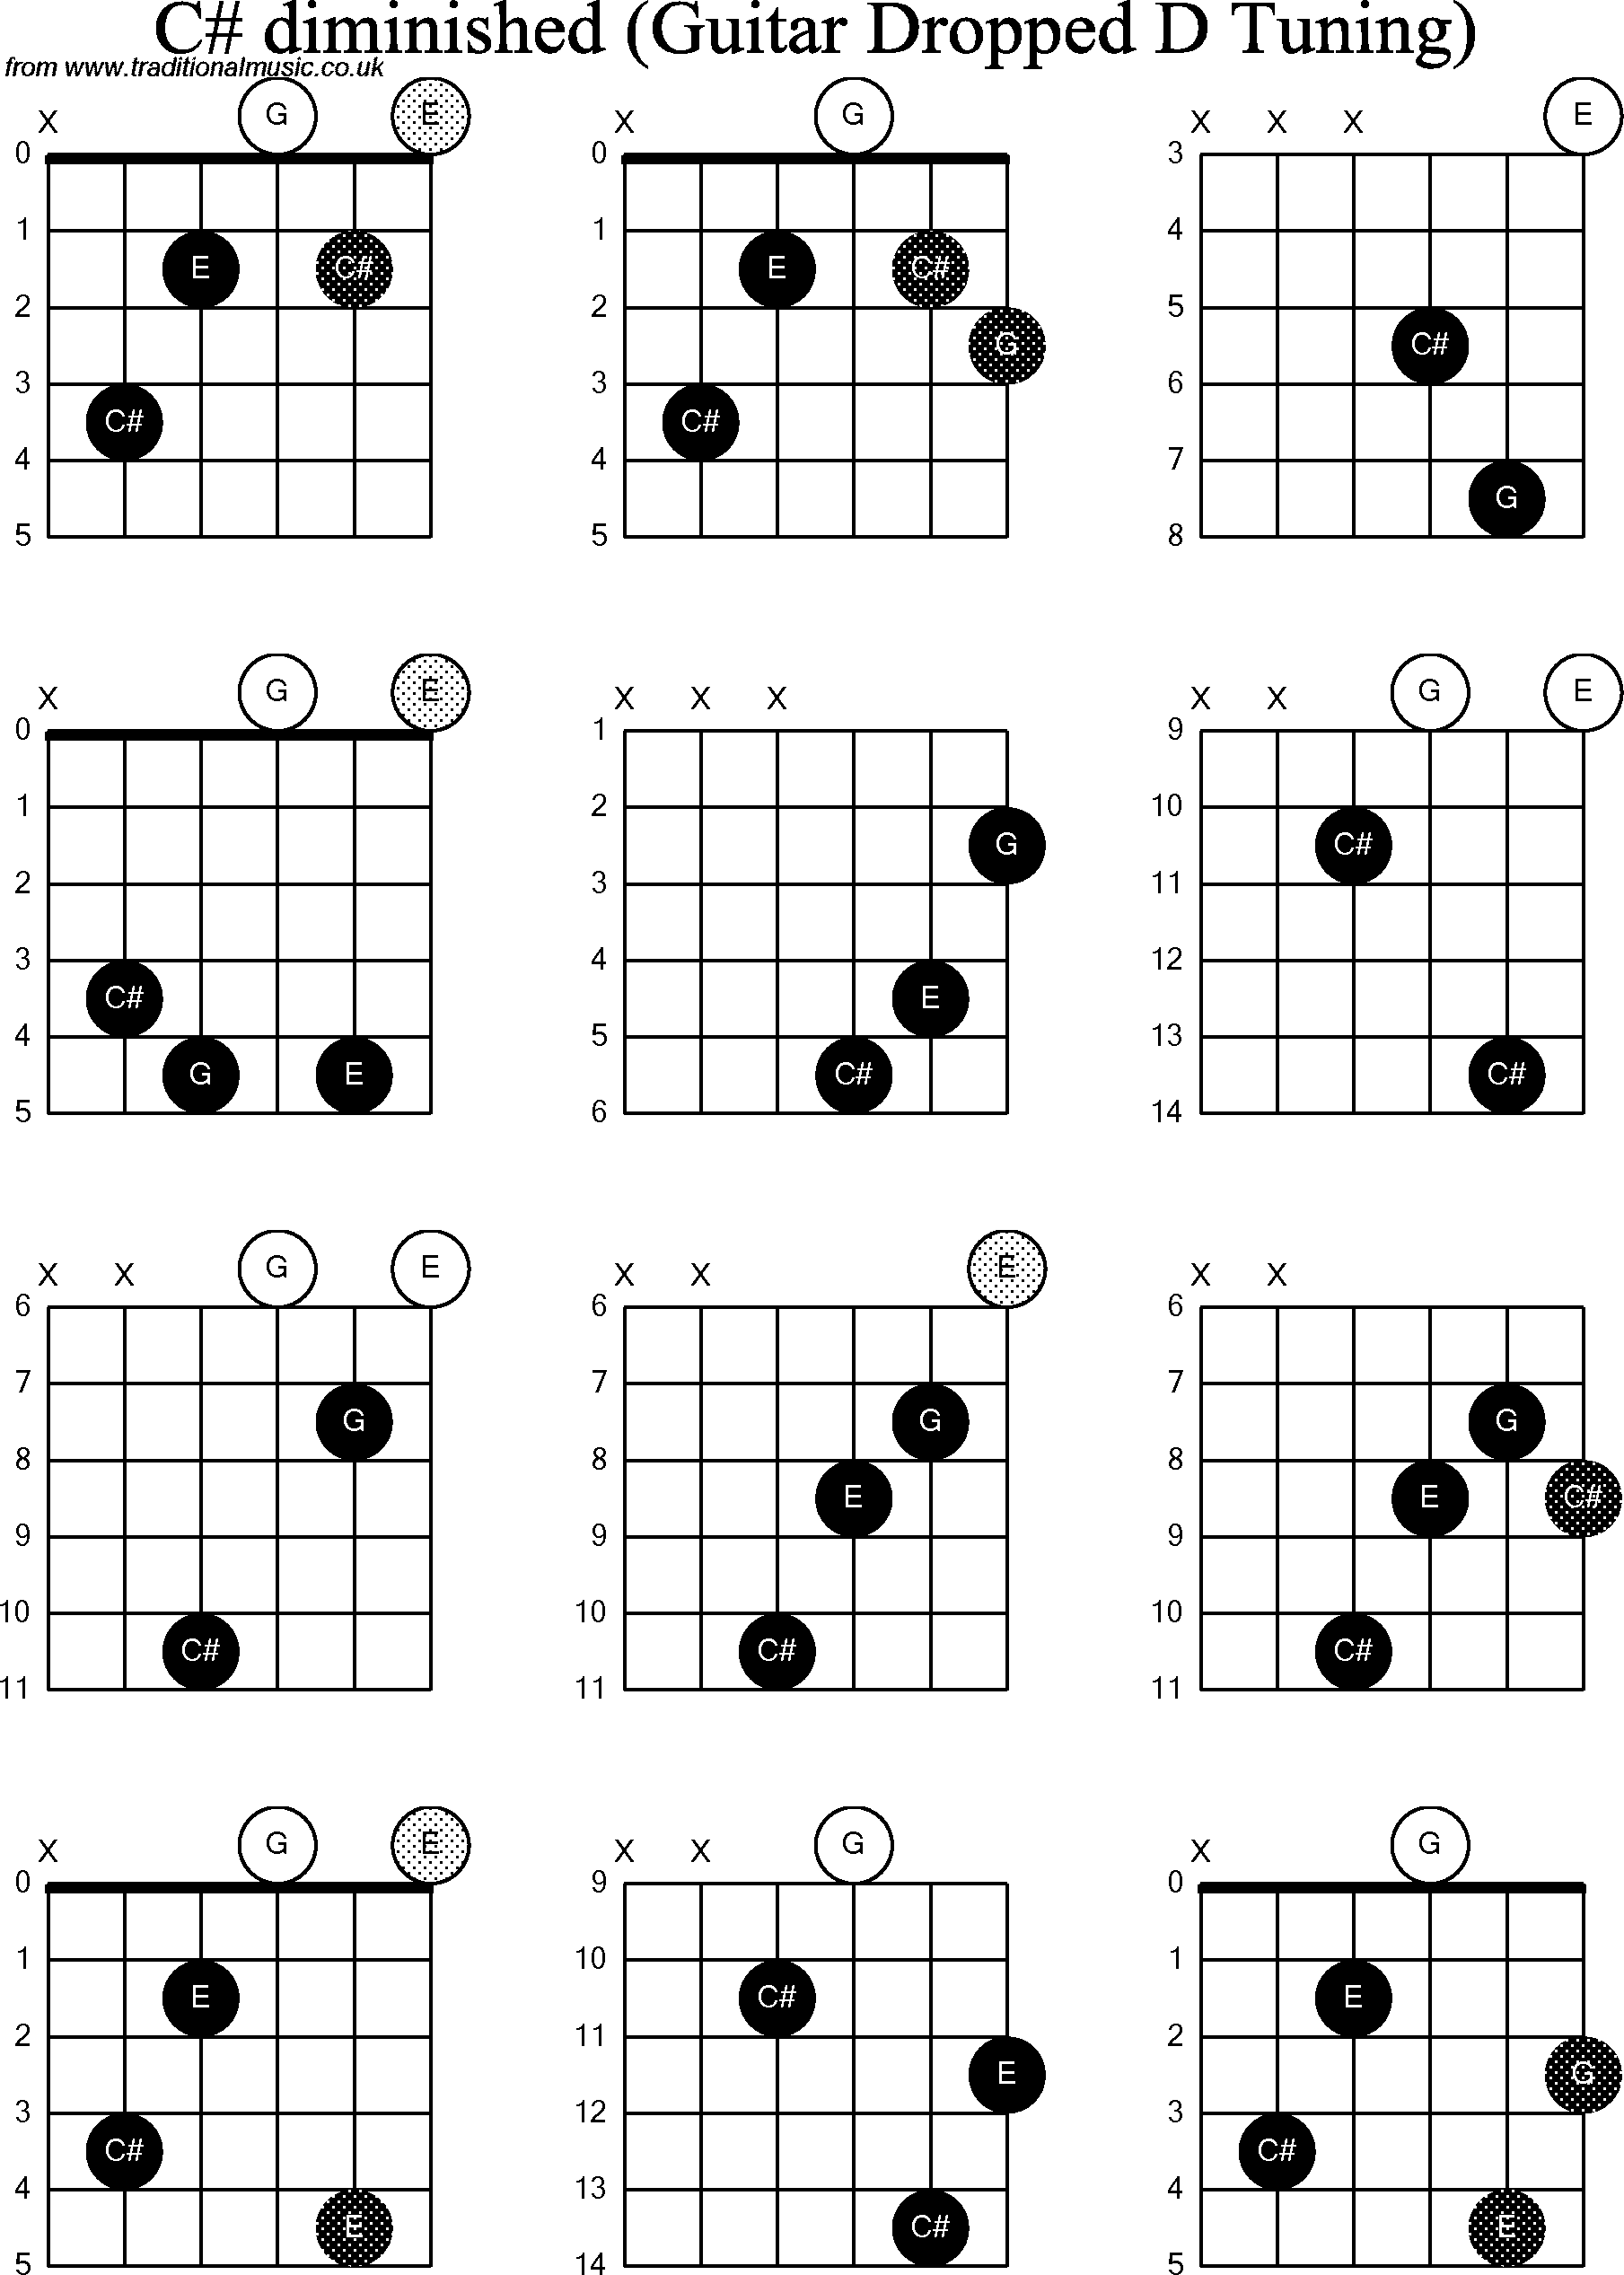 Chord diagrams for dropped D Guitar(DADGBE), C Sharp Diminished